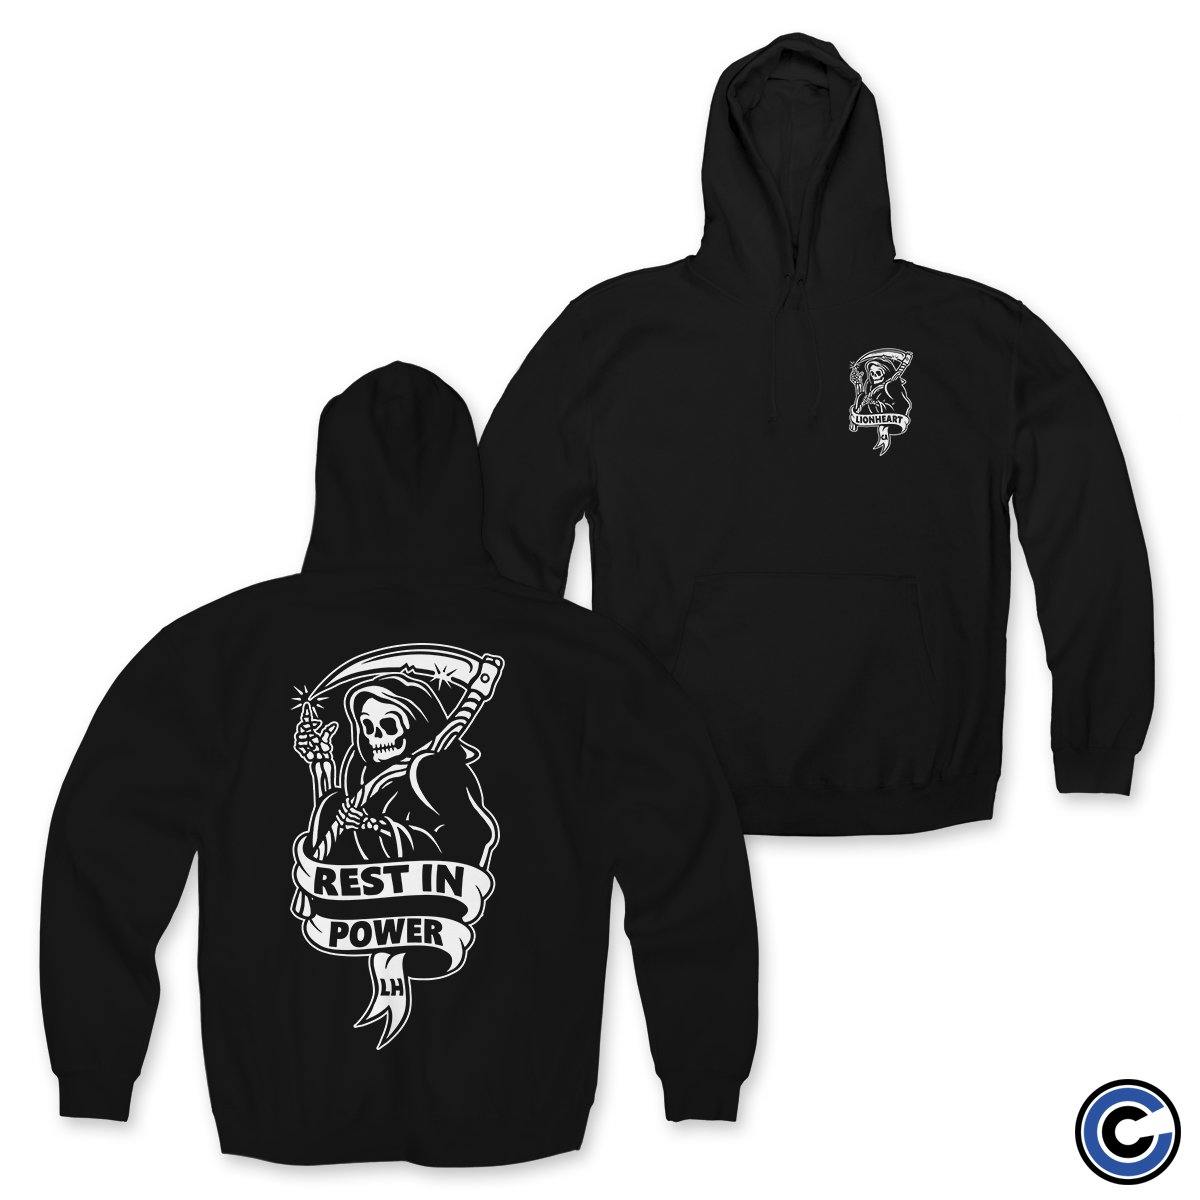 Buy – Lionheart "Rest In Power" Hoodie – Band & Music Merch – Cold Cuts Merch